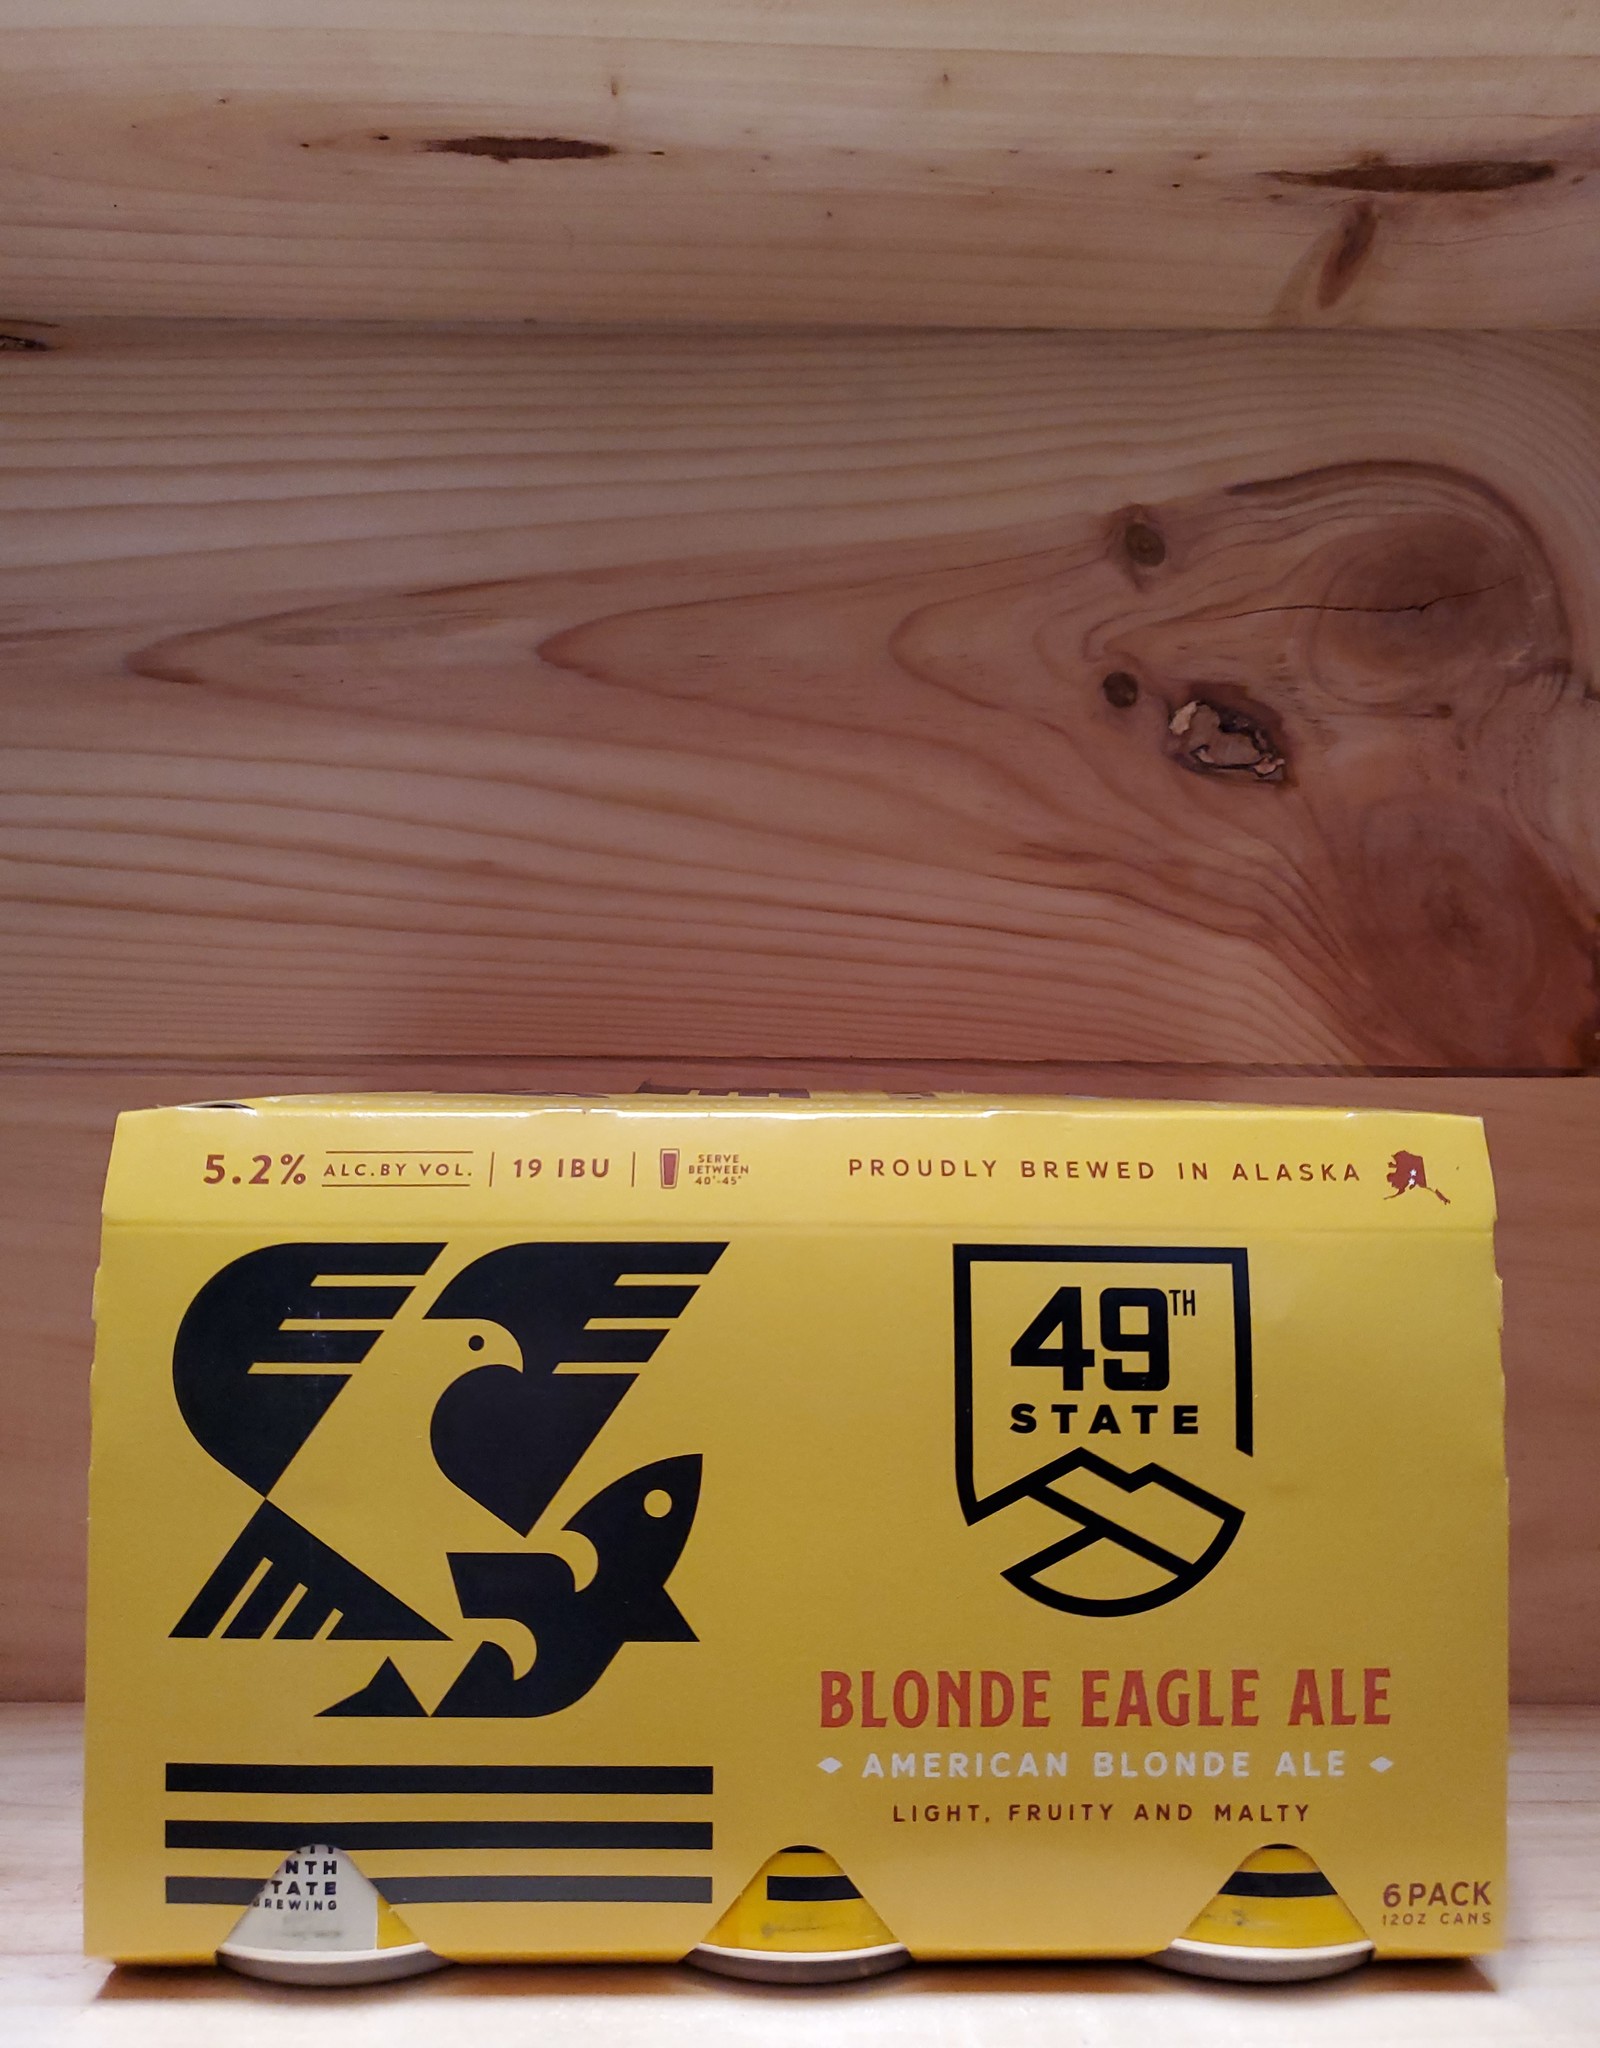 49th State Blonde Eagle Ale Cans 6-pack